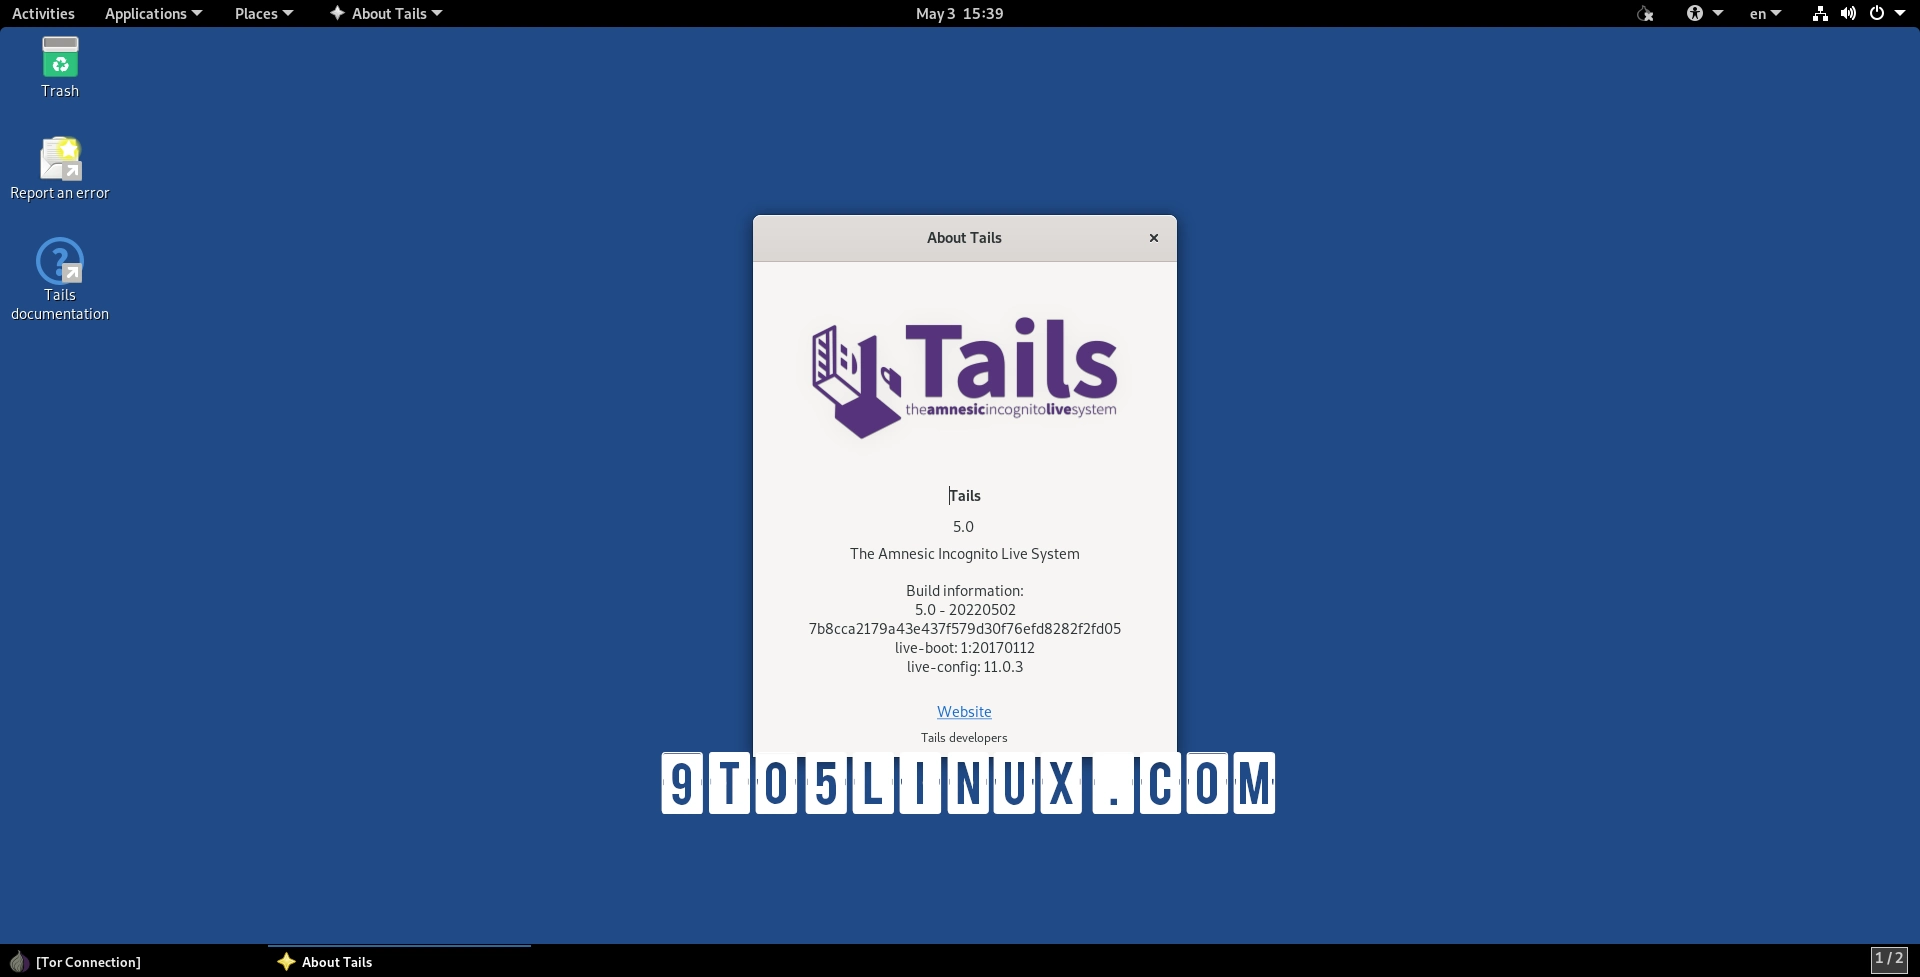 Tails 5.0 Anonymous OS Officially Released, Based on Debian GNU/Linux 11 “Bullseye”